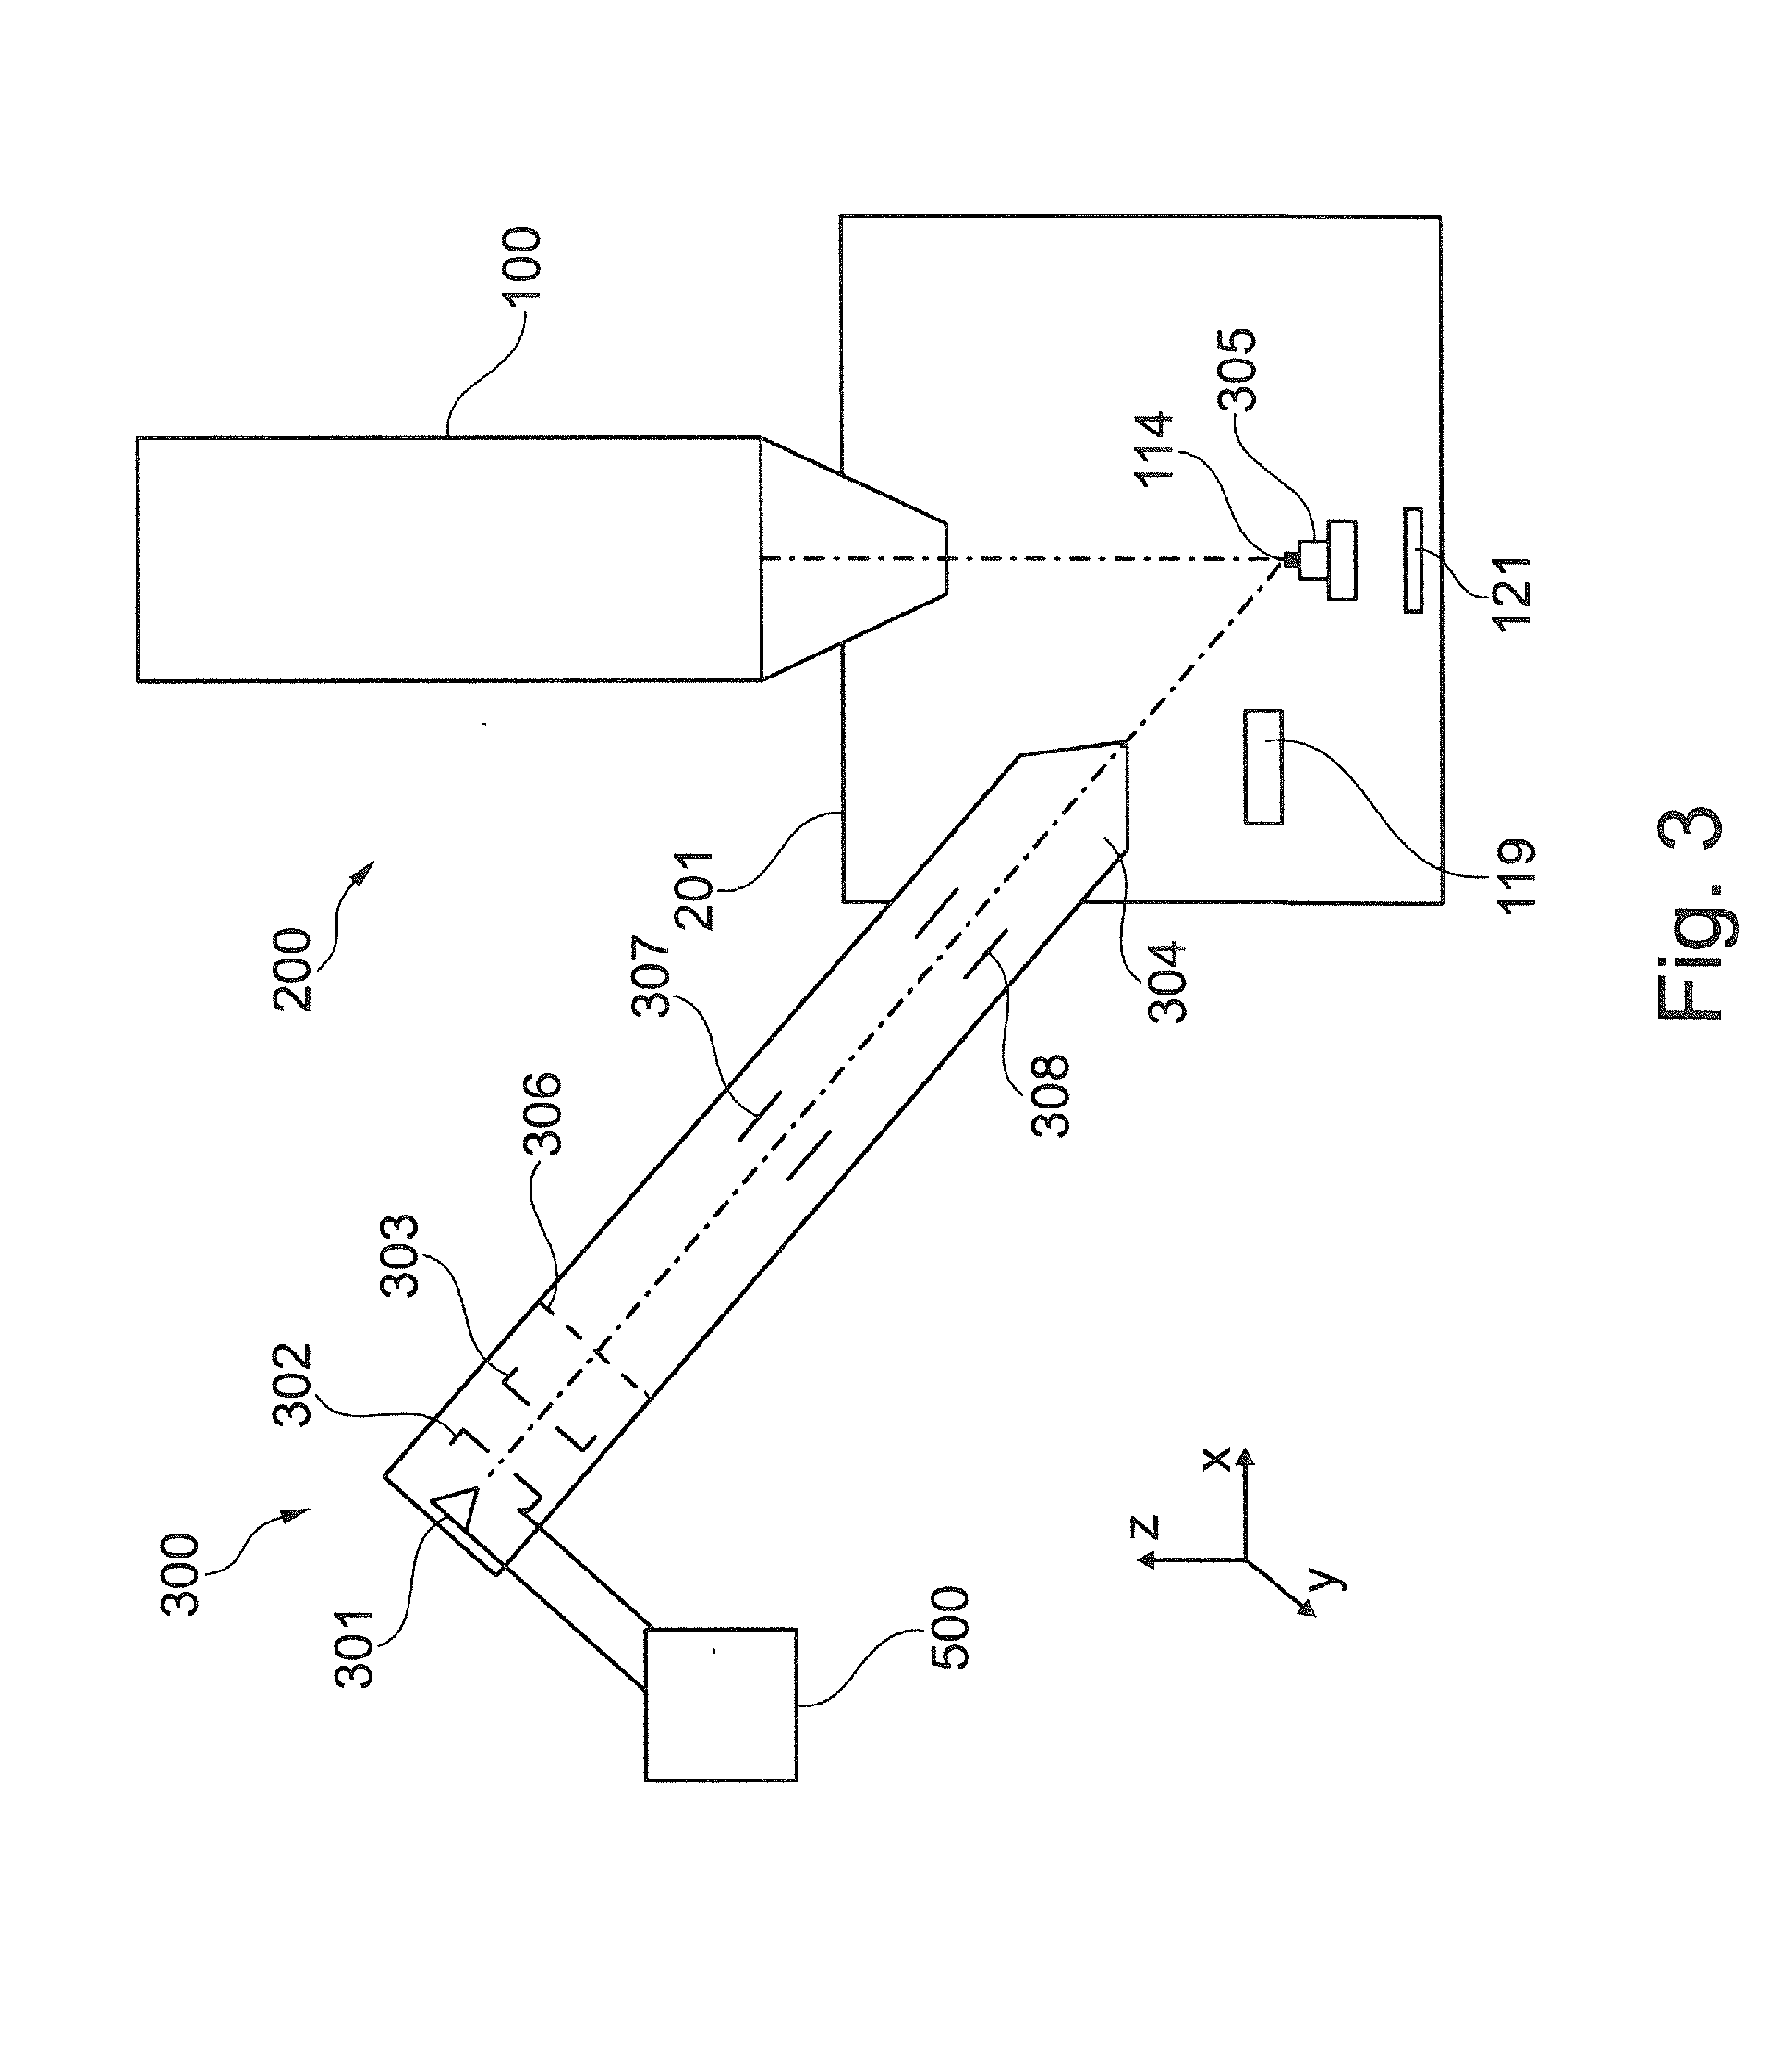 High-voltage supply unit and circuit arrangement for generating a high voltage for a particle beam apparatus